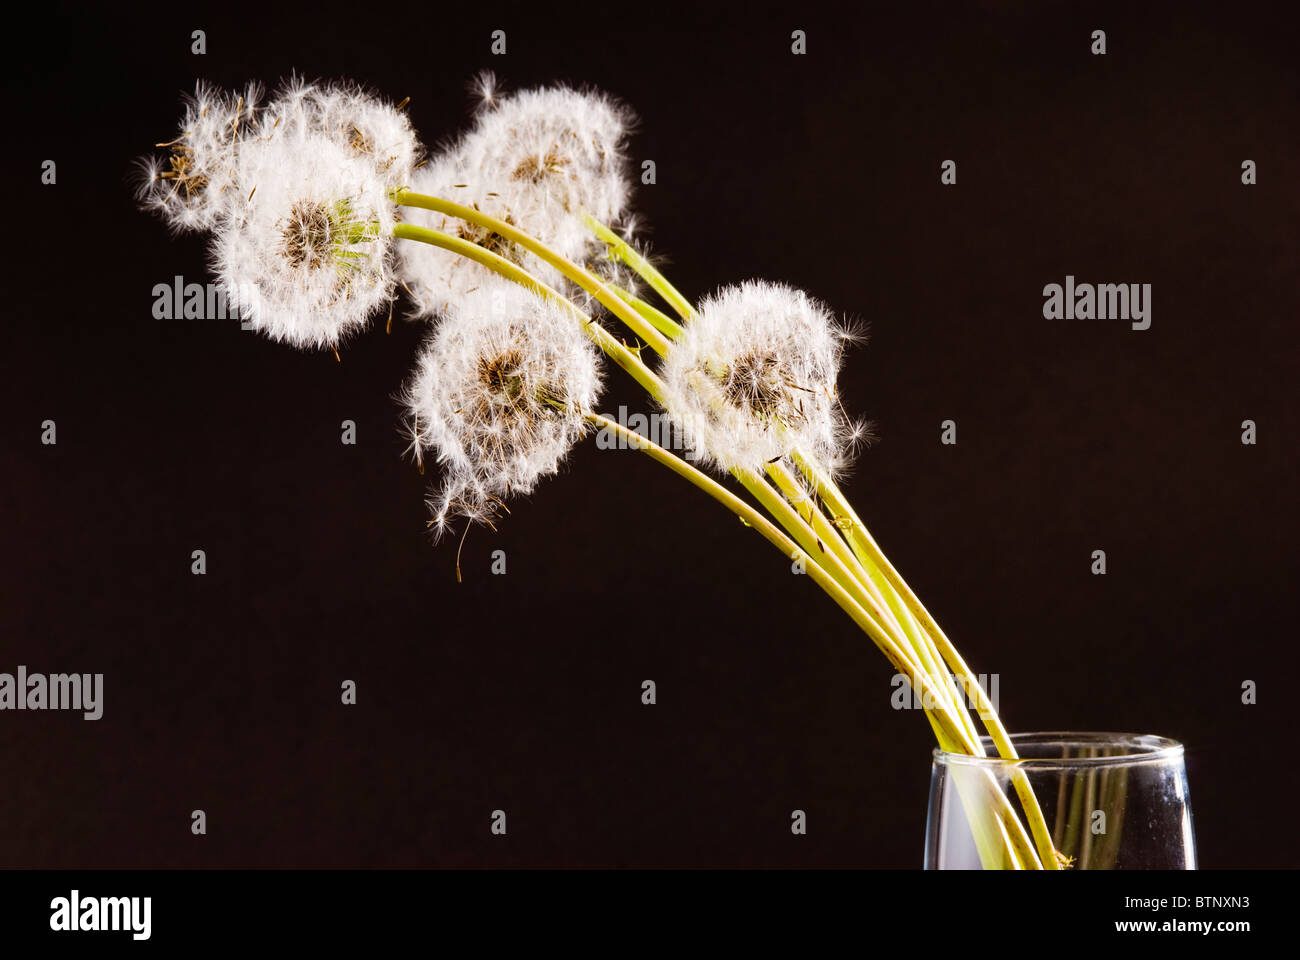 Dandelion flowers and seeds in glass with black background. Stock Photo